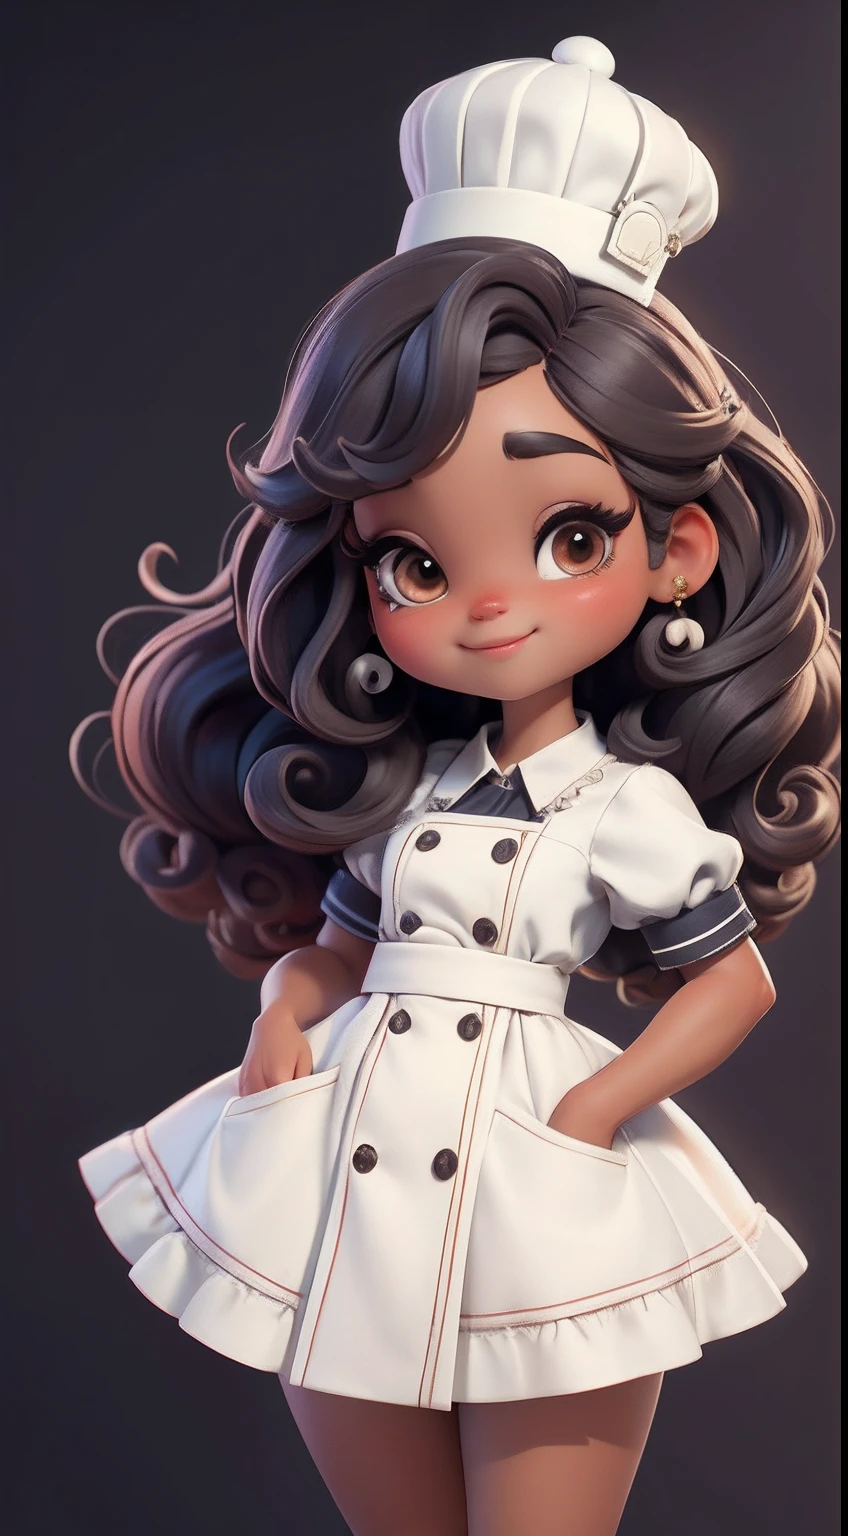 Create a series of cute baby chibi style afro dolls with a cute pastry chef theme, each with lots of detail and in an 8K resolution. All dolls should follow the same solid background pattern and be complete in the image, mostrando o (corpo inteiro, incluindo as pernas: 1.5)

Boneca Mini Chef: Chame-a de Marina. Ela deve ter cabelo pequeno em tom preto marrom. Seus olhos devem ser grandes e expressivos, with long eyelashes and rosy cheeks. Sorriso delicado e branco. Sophie deve estar vestida com uma jaqueta de chef, striped pants and an ornate chef's hat. She must hold a chocolate brigadier in her hands. Certifique-se de adicionar detalhes nas roupas, such as buttons and pockets, sapato bonito

Certifique-se de adicionar sombras, texturas e detalhes nos cabelos, roupas, confectionery utensils, to make them even more adorable and charming.